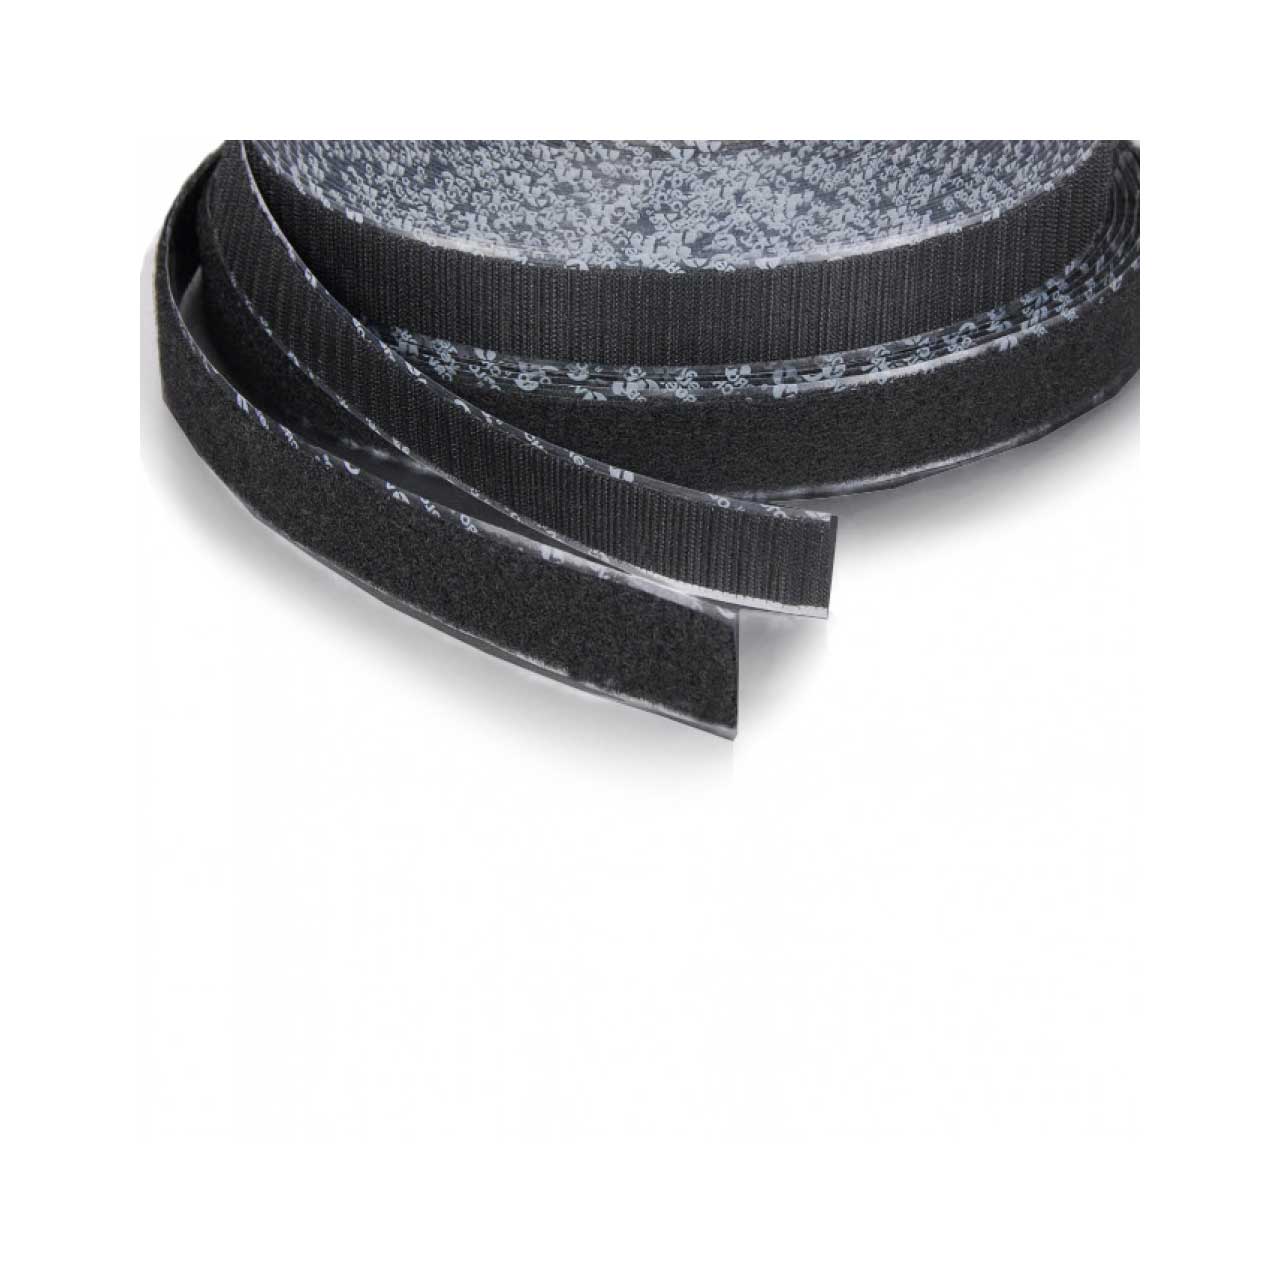 VELCRO® Brand 184987 Tape On A Roll Pressure Sensitive Rubber Adhesive Loop  - 1 Inch x 25 Yard - Black